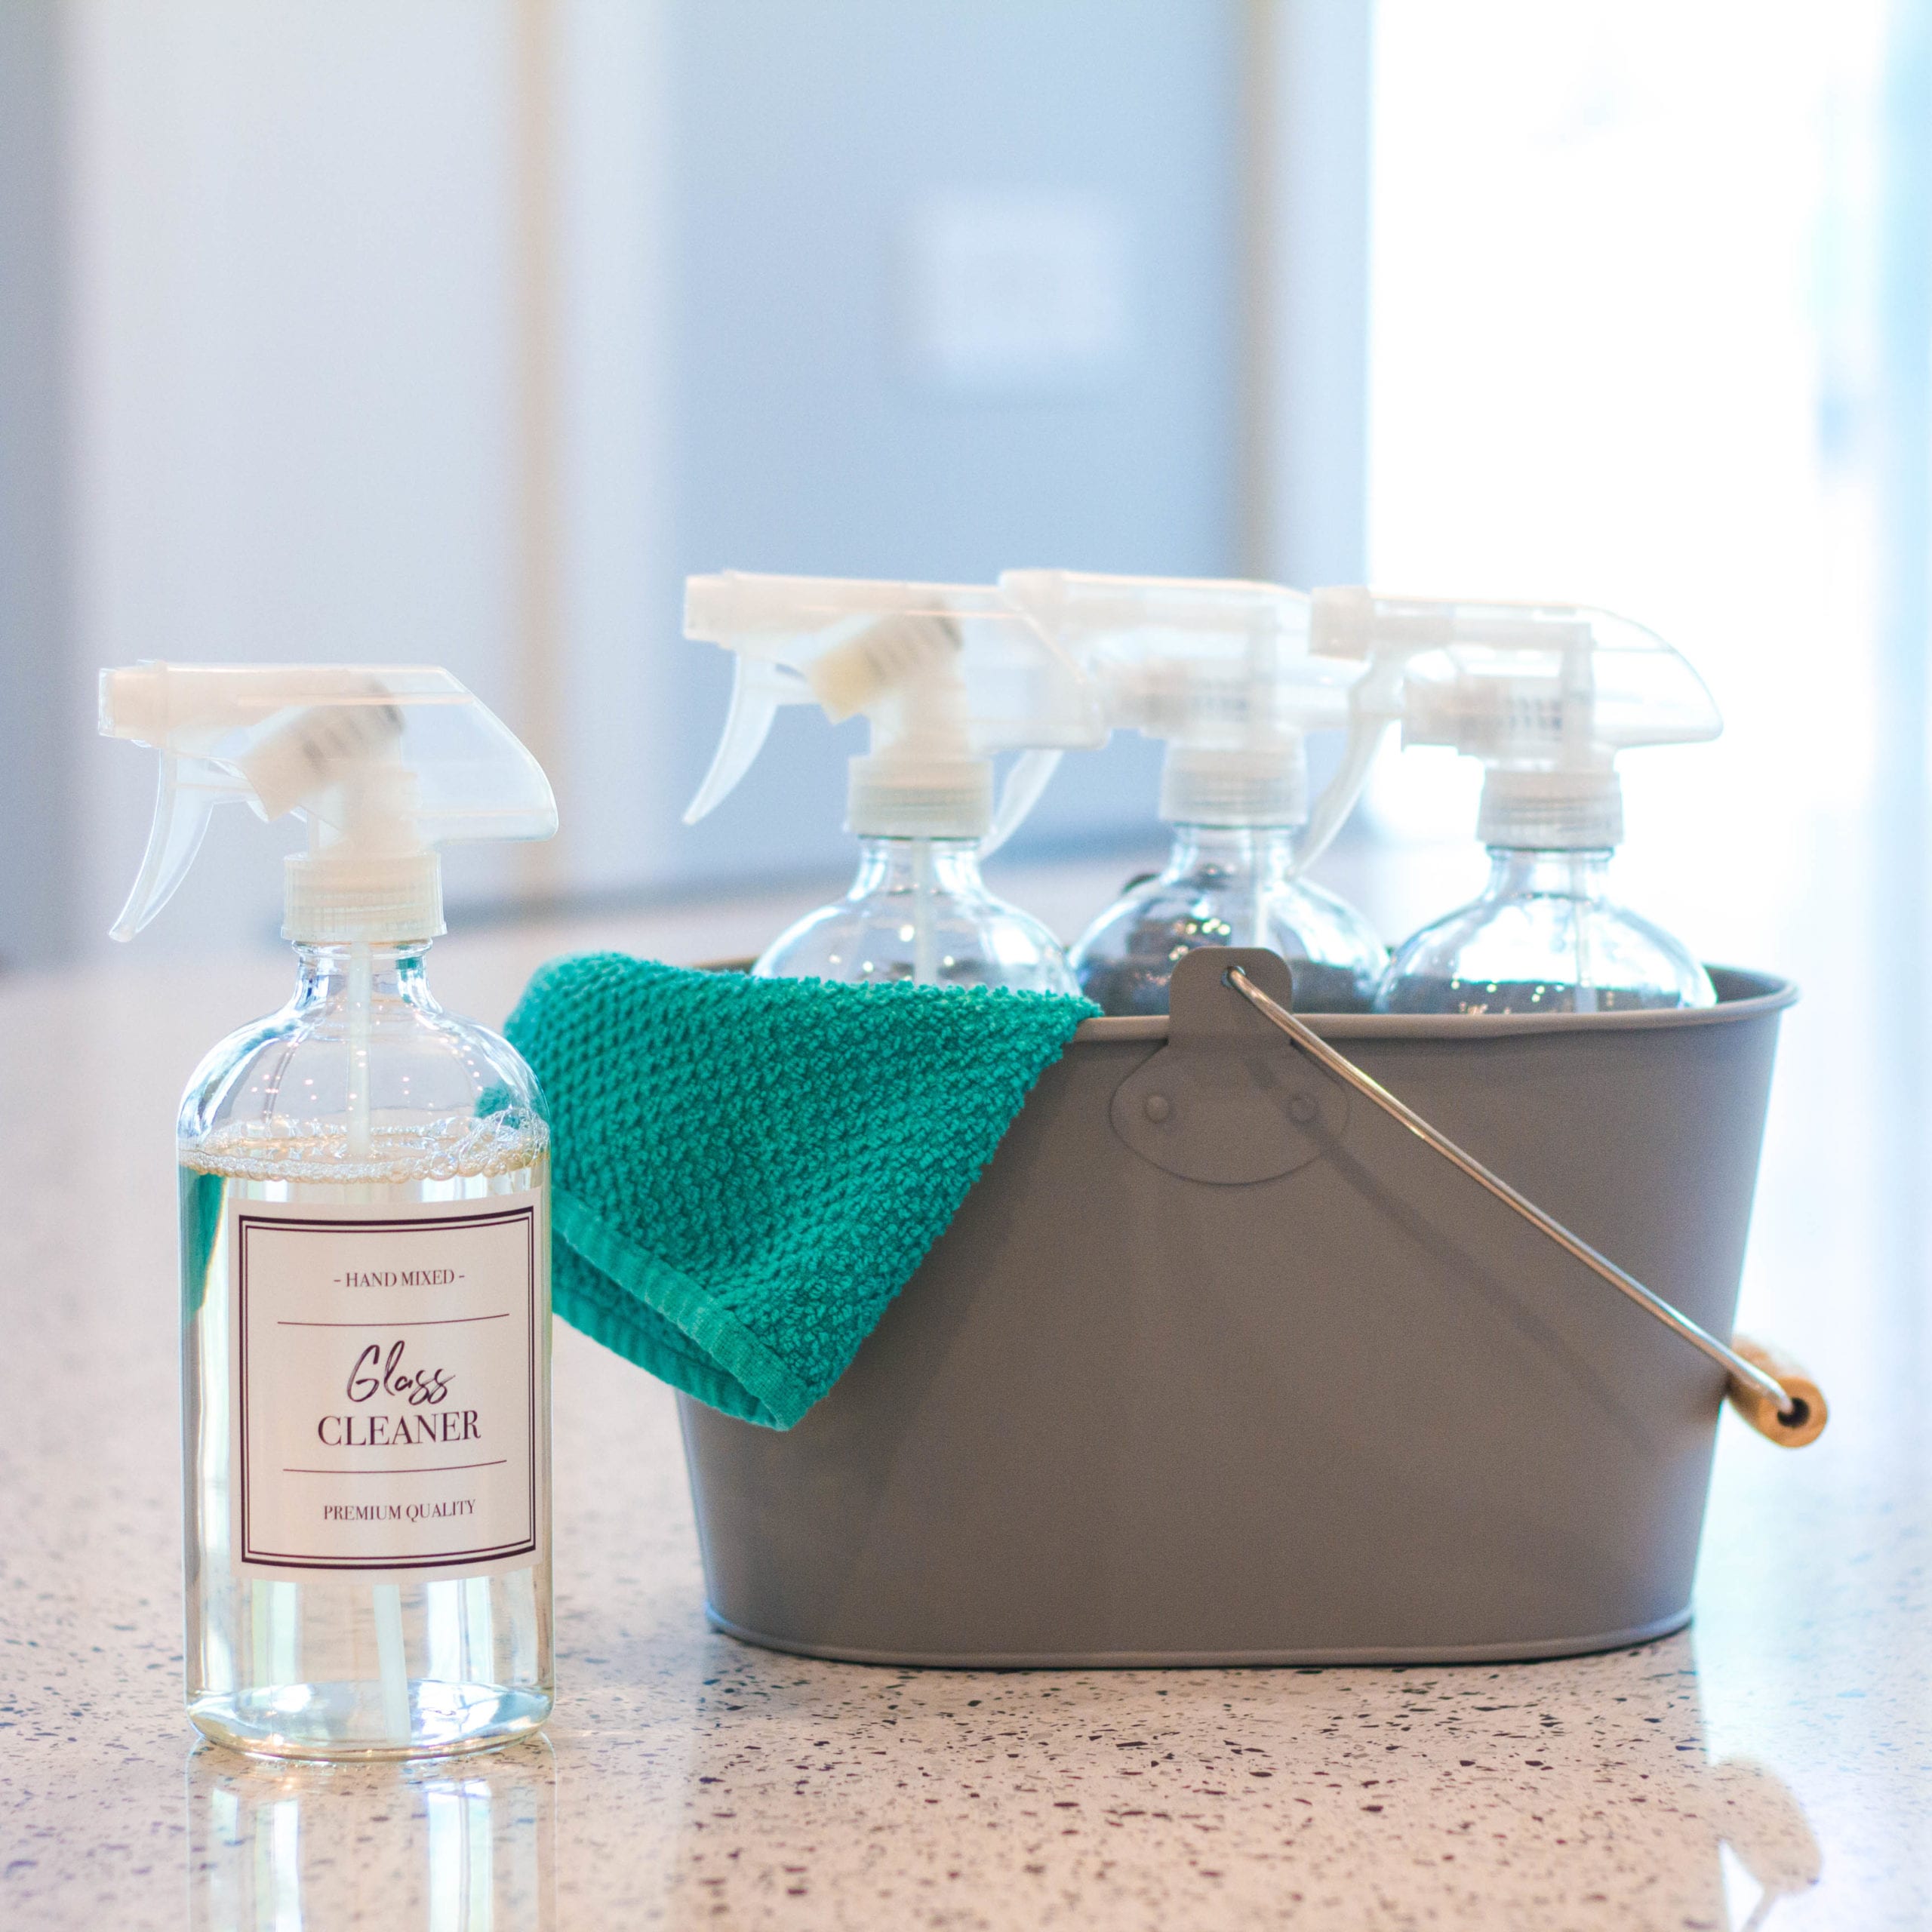 13 Essential Things to Clean Before Guests Arrive